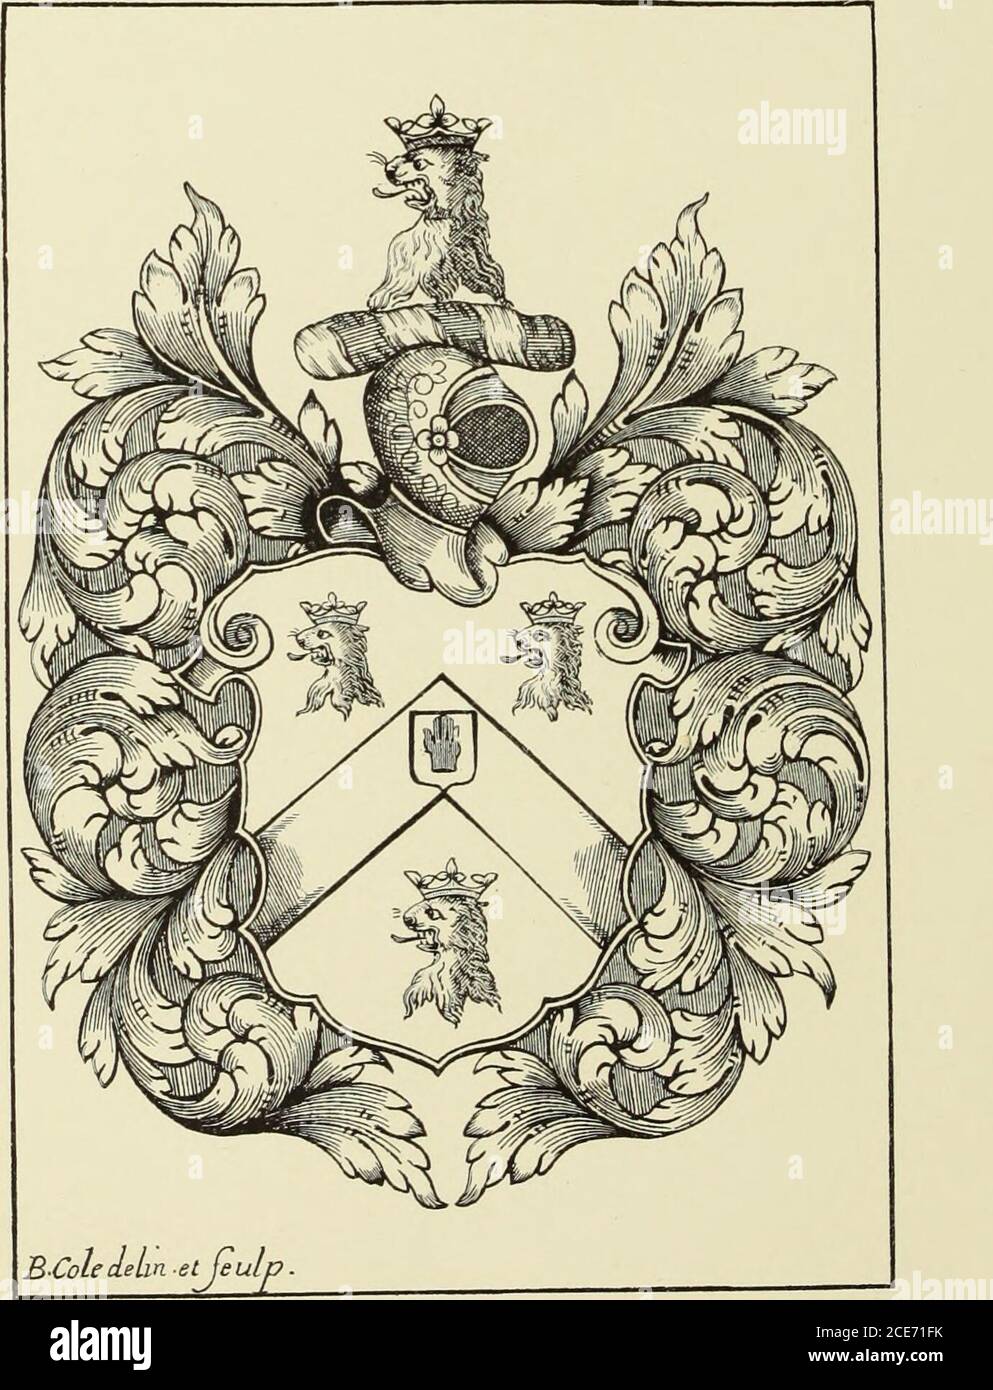 . Artists and engravers of British and American book plates : a book of reference for book plate and print collectors . Nay lorTtios. Baylor Codling sculp. Armorial 1790 Codling sculp1. Festoon 1780 Thos. Rodie Codlirg sc. Armorial 1810 (Smith) Codling sc. Lpool. Pictorial 1790 John Nelson Wood Codling Sculp. Armorial 1810 Wright Codling Sculpt. Armorial 1810 Coffin (R.), Exeter J. Commins, 1777 R. Coffin Festoon 1777 J. Commins R. Coffin Festoon 1777 John Ho£g Coffin Xon Chippendale I/60 Henry Manaton, 1762 Coffin Exon Chippendale 1762 (Simcoe). See Ex Libris Journal, V., 167 Coffin Xon Chipp Stock Photo